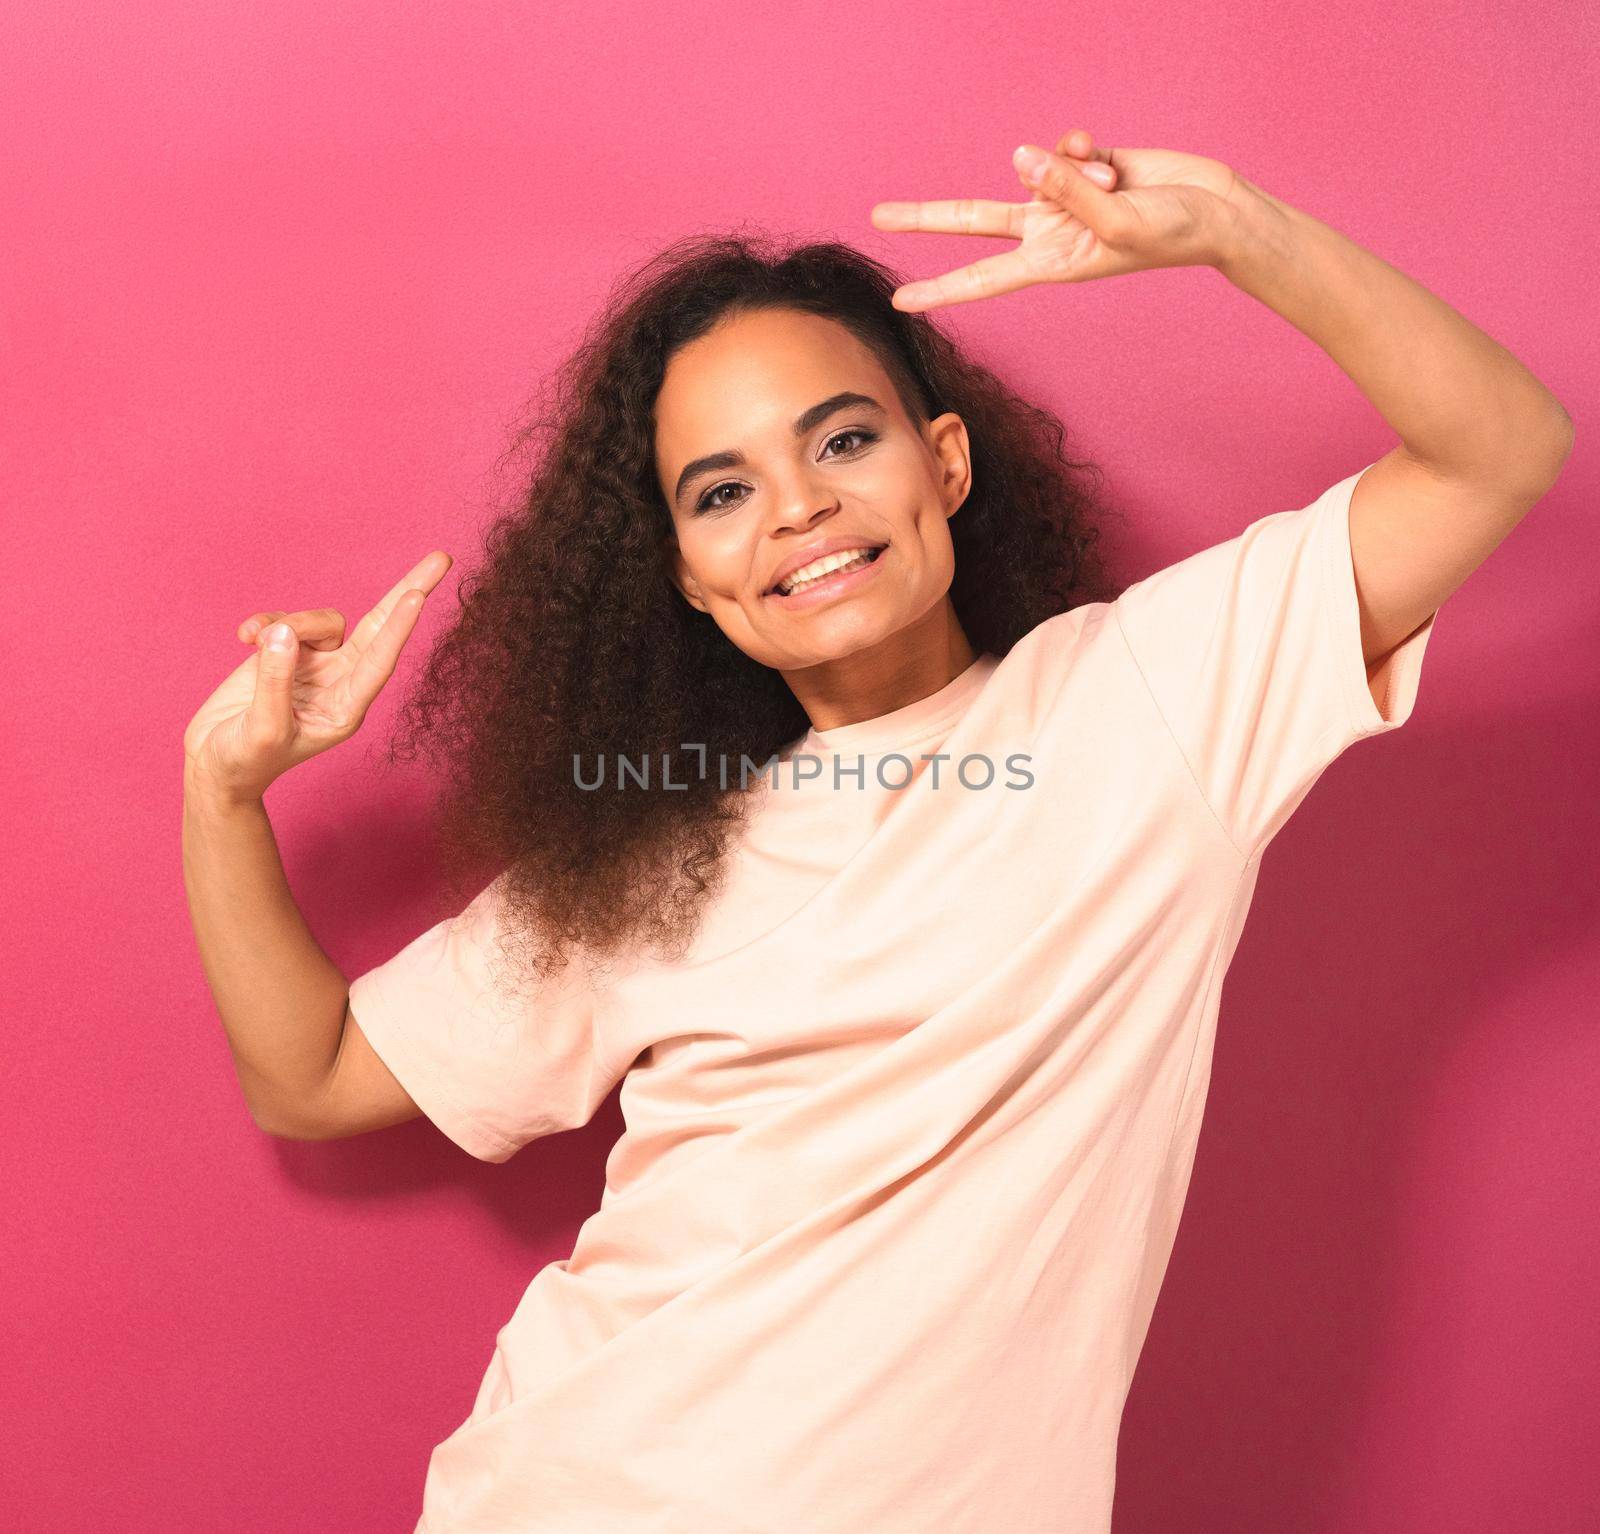 Young African American girl with Afro hair dancing gesturing peace with hands lifted up looking positively at camera wearing peachy t-shirt isolated on pink background. Beauty concept. Square footage.